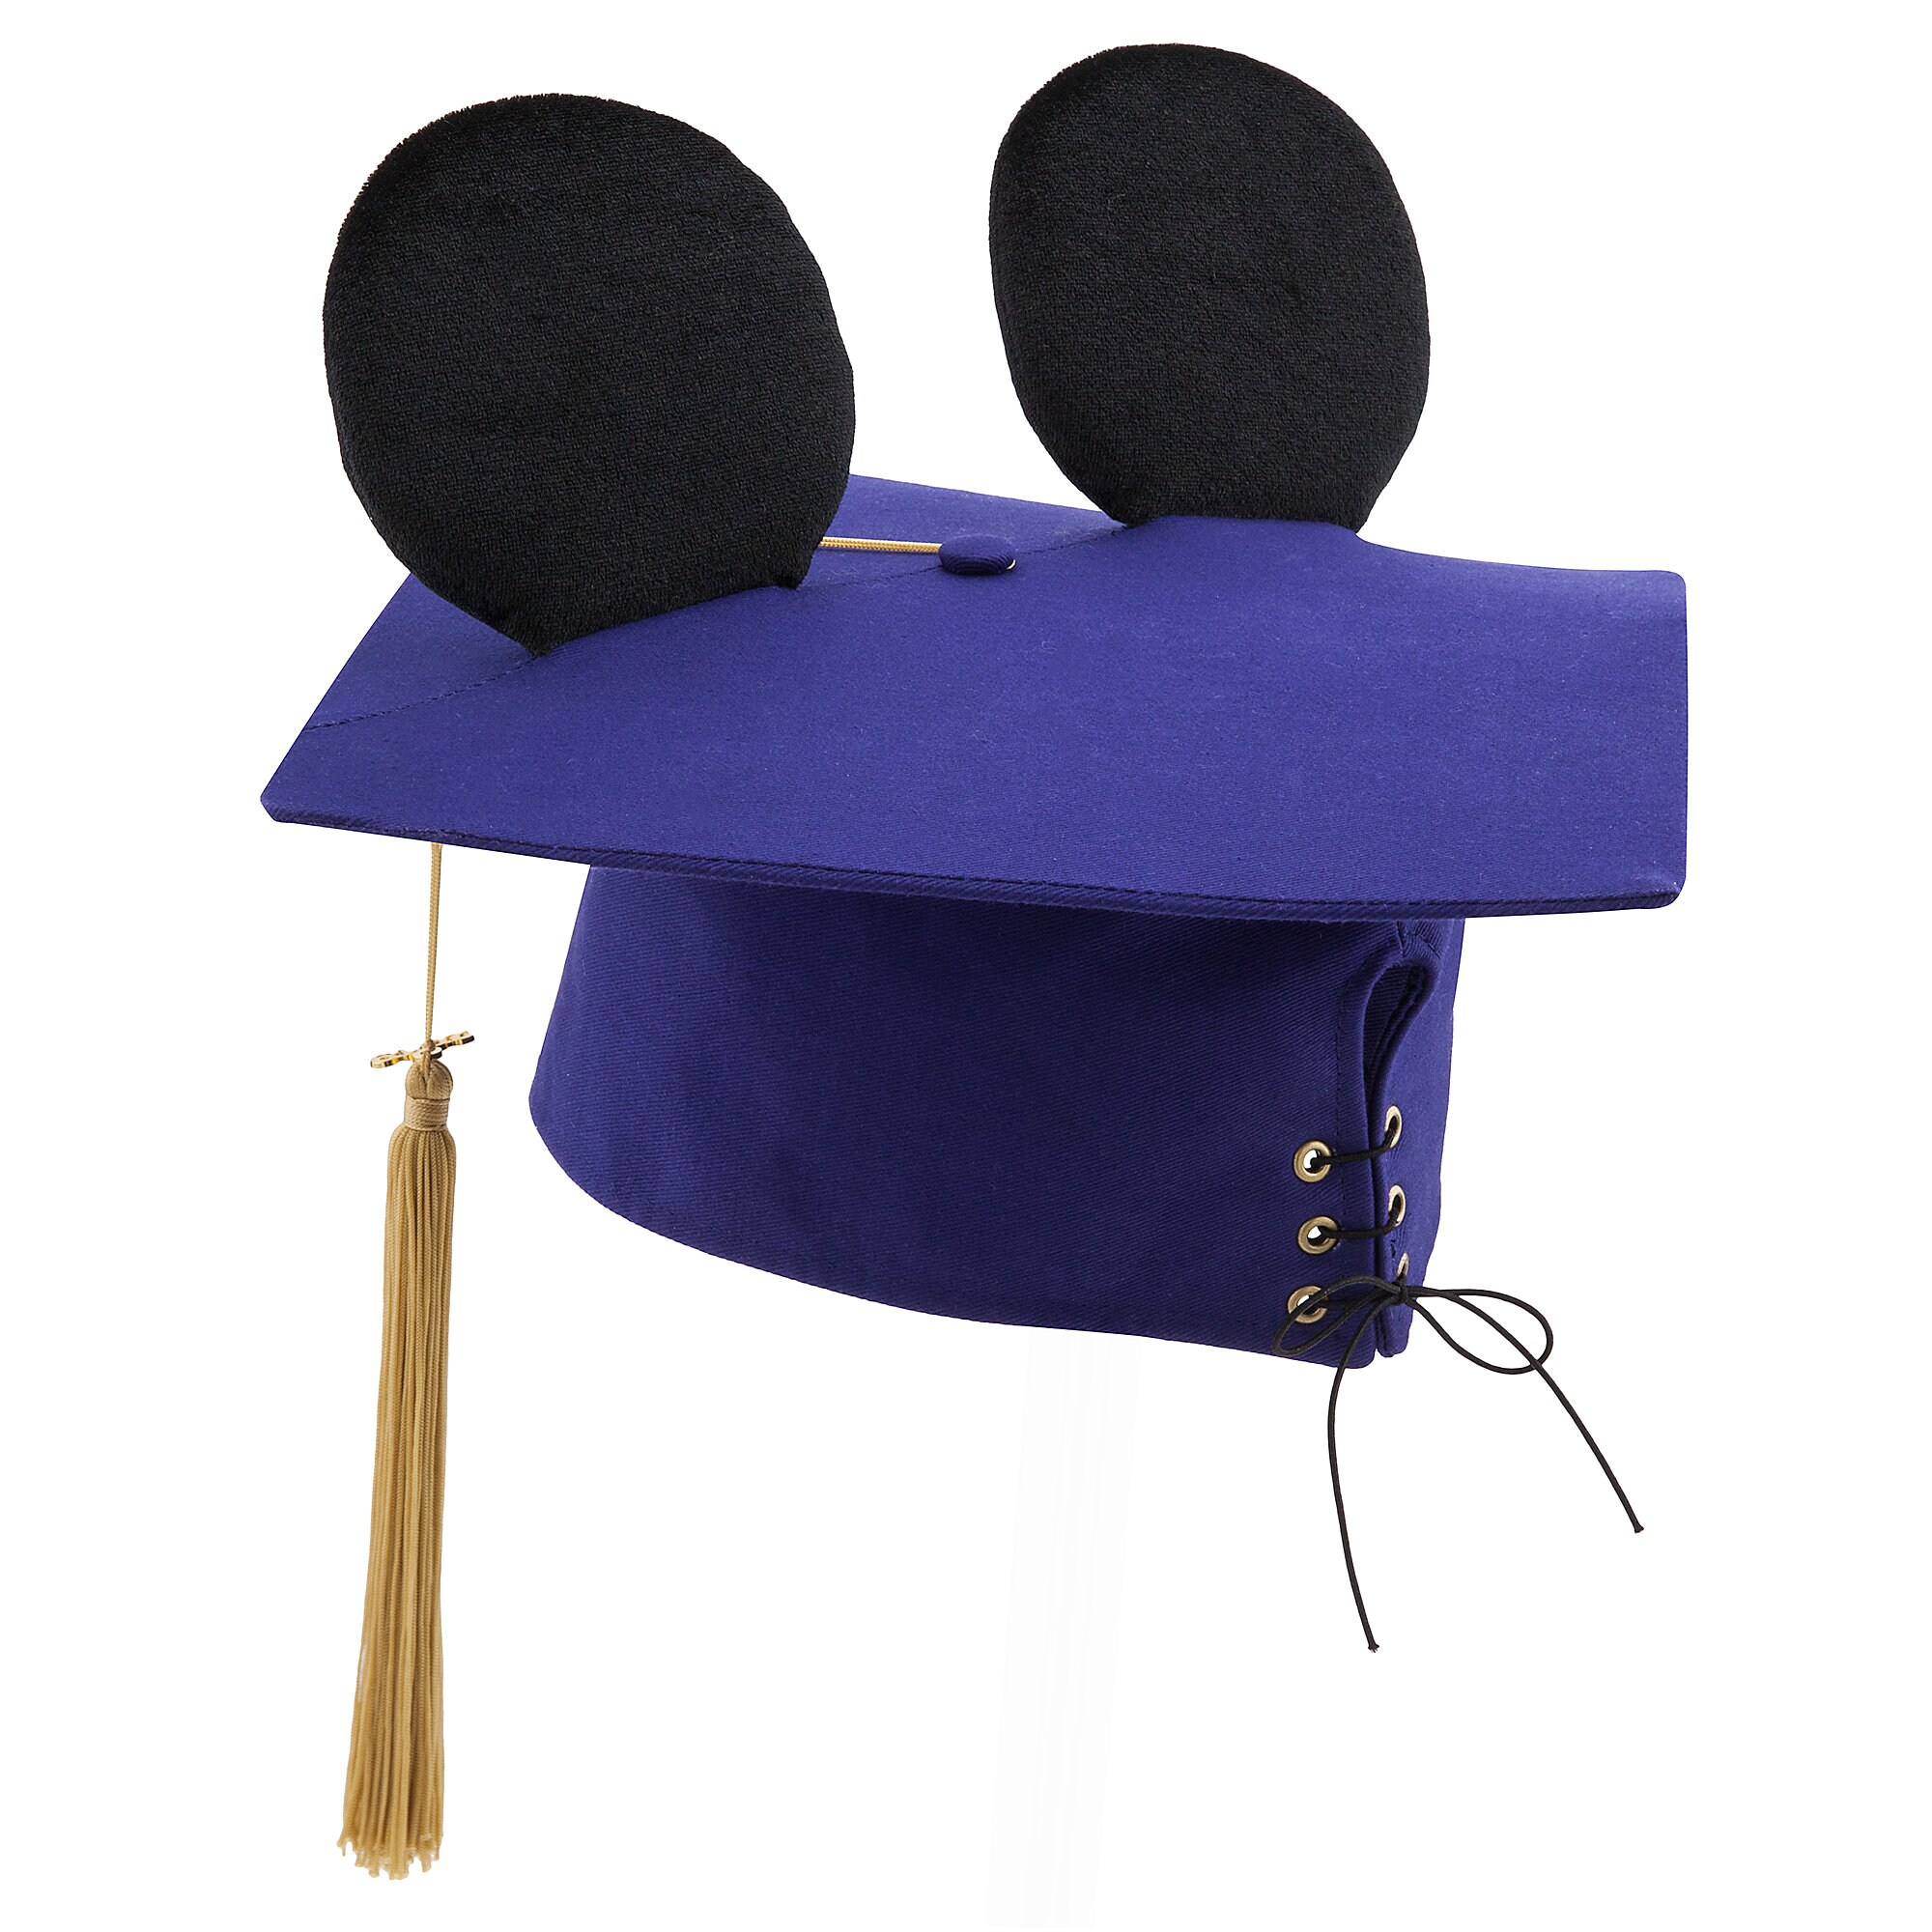 Mickey Mouse Ear Hat Graduation Cap for Adults - 2019